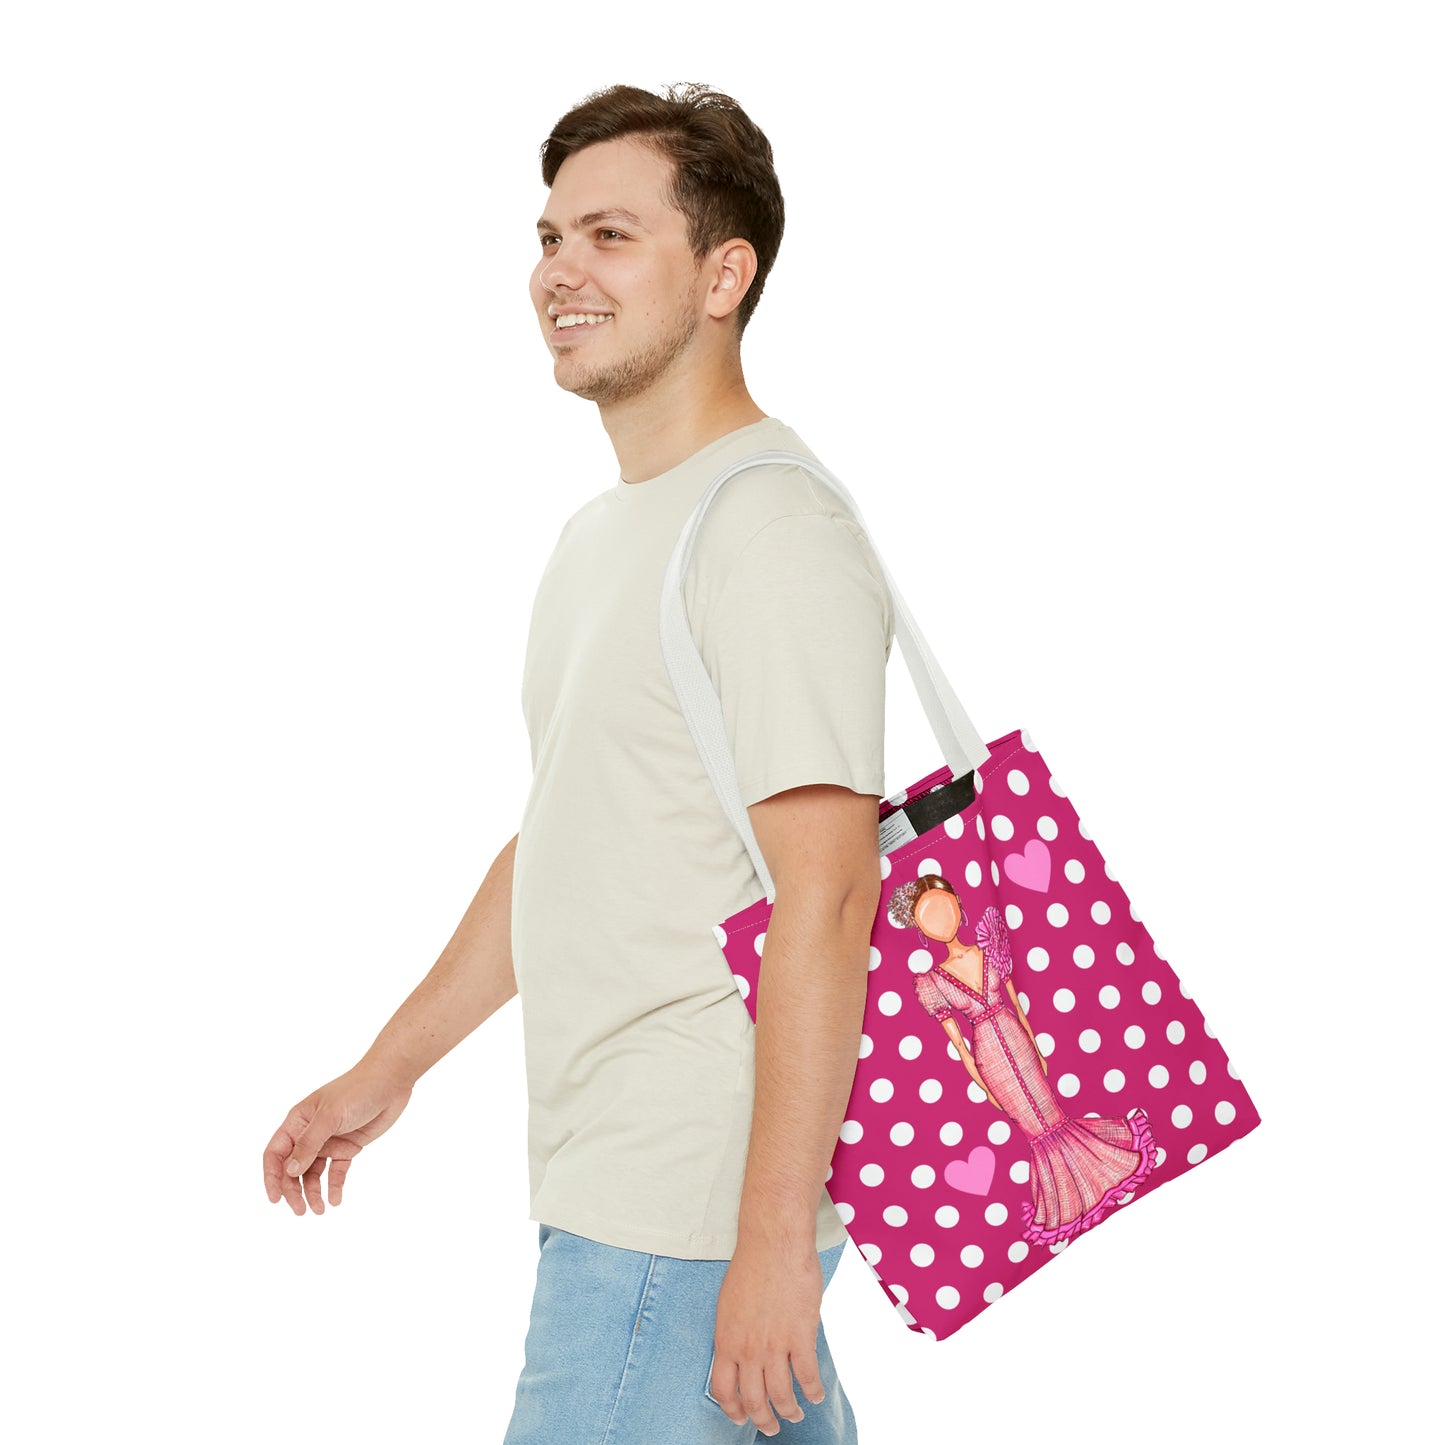 a man carrying a pink and white polka dot bag